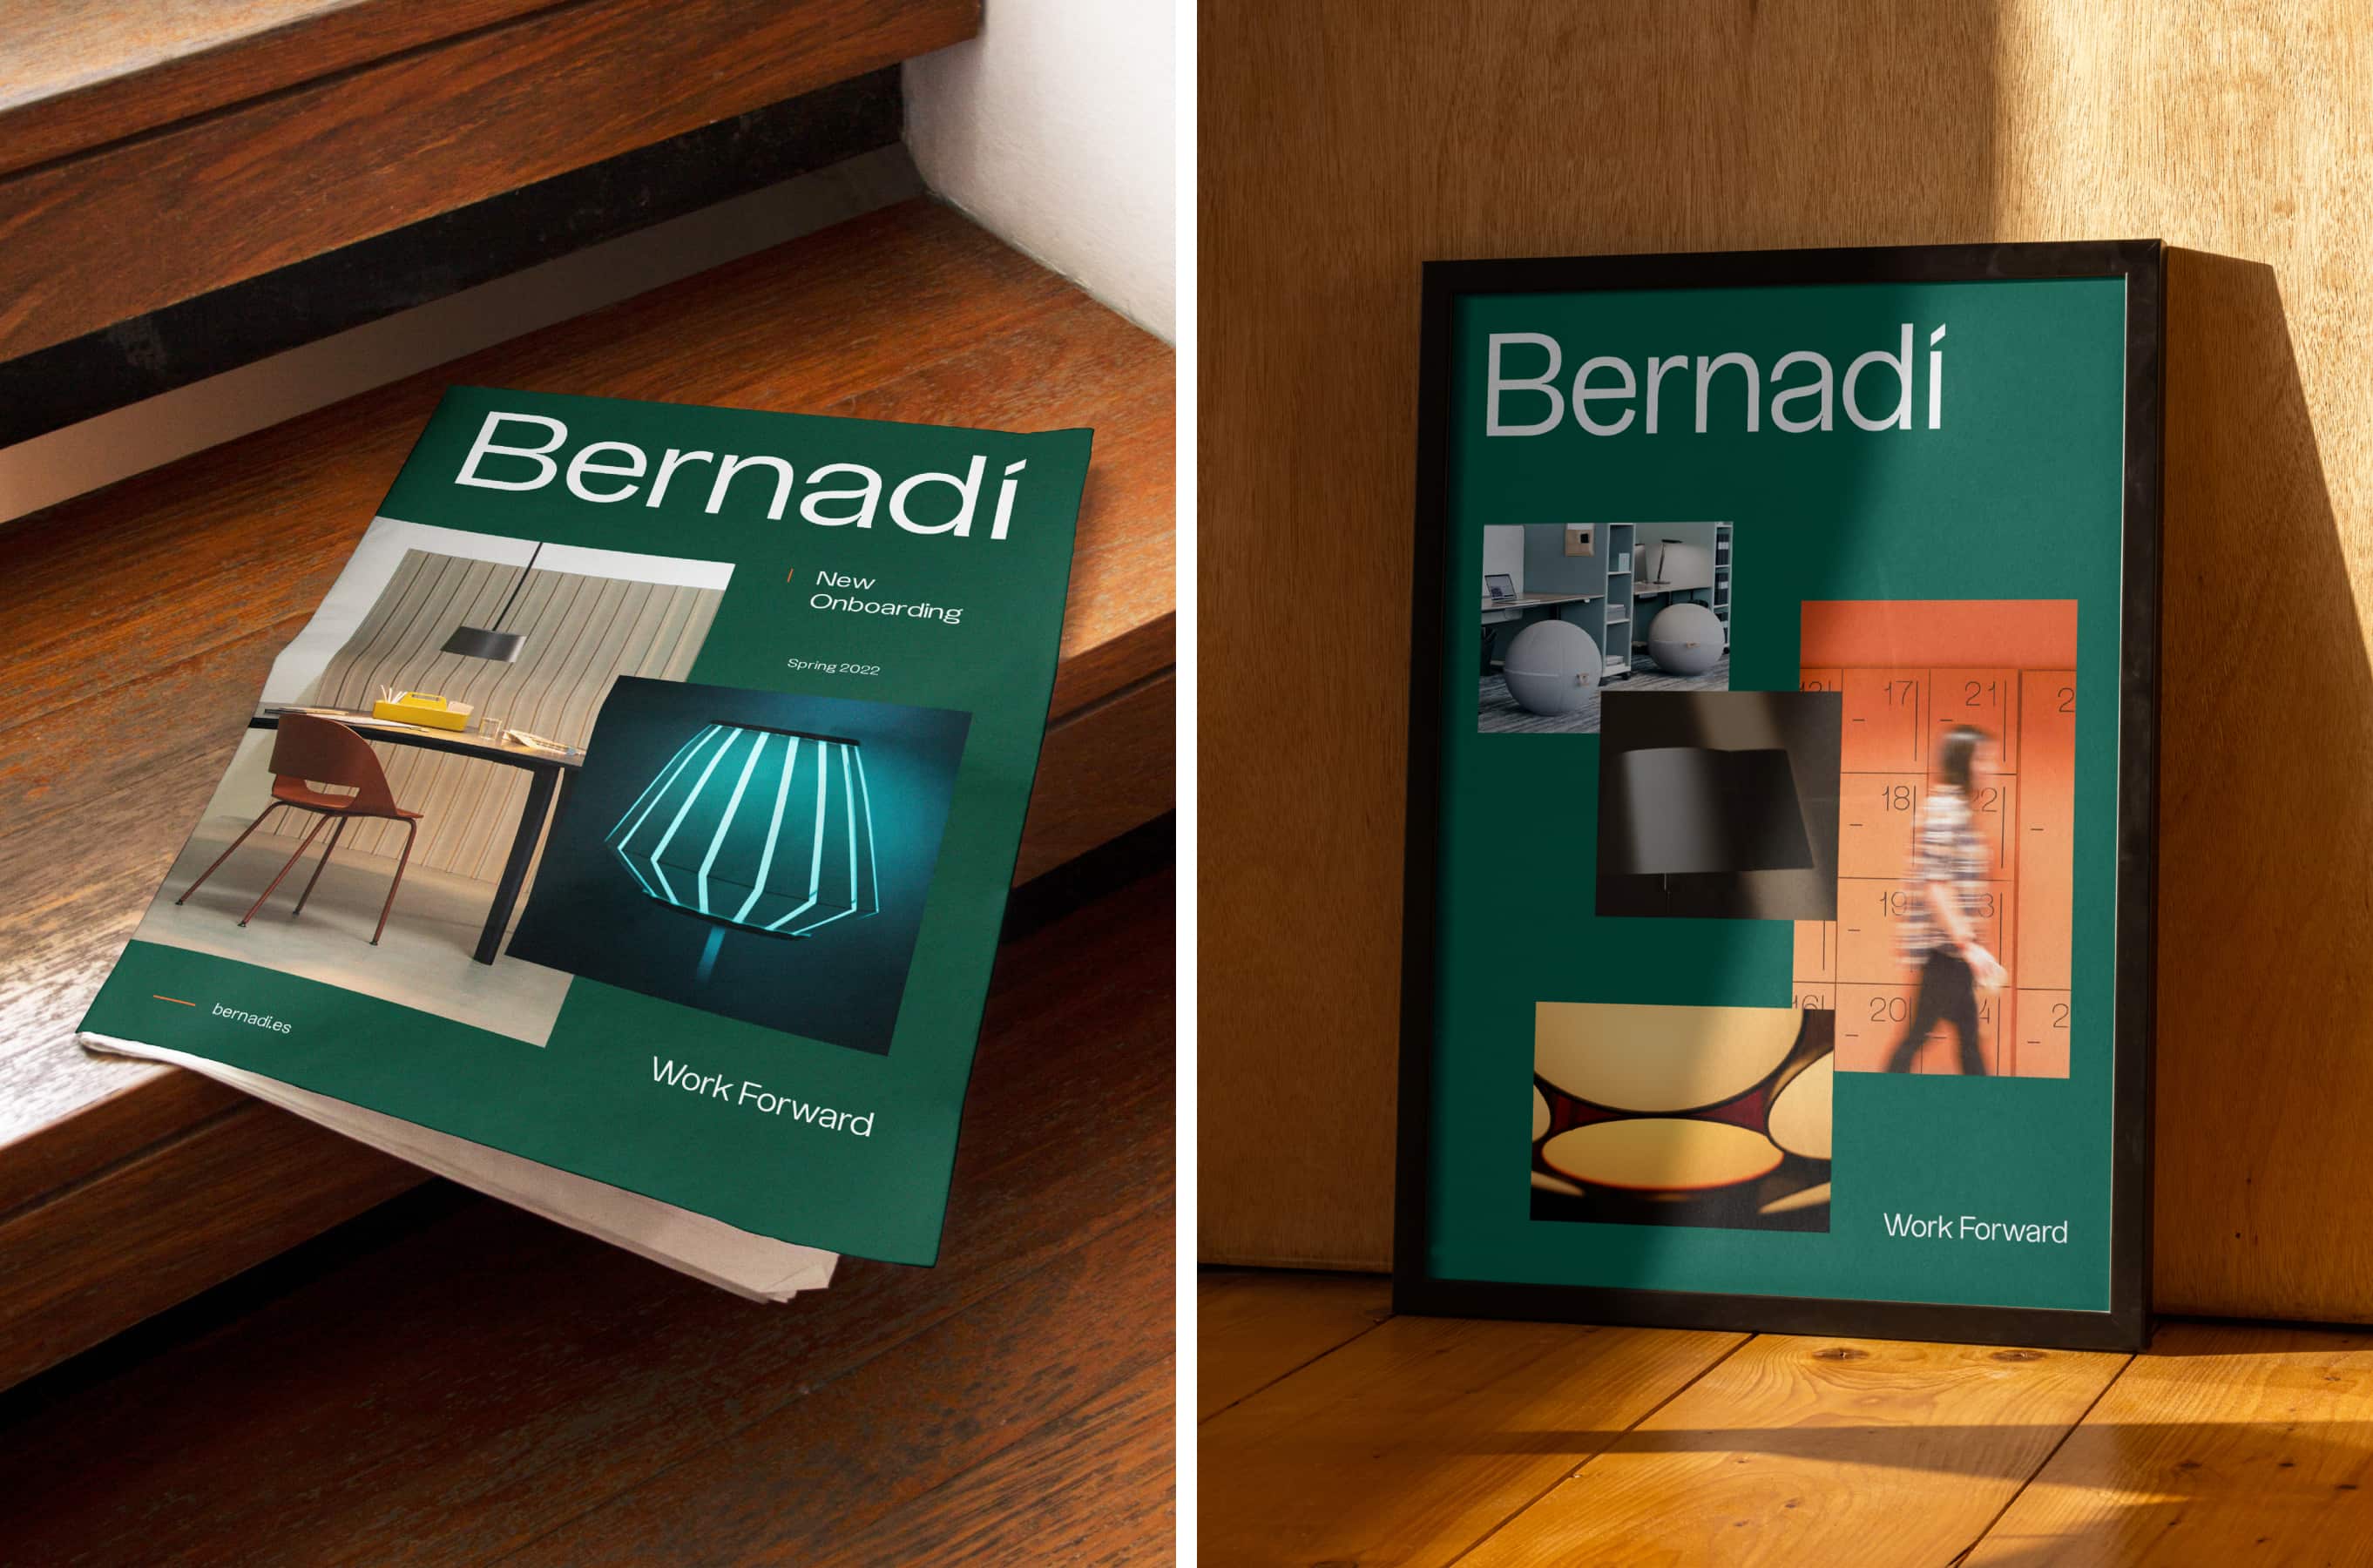 Bernadí is a family business that has become a leader in workplace furniture in Barcelona. However, updating the brand and culture became critical in order to thrive in new competitive contexts.
